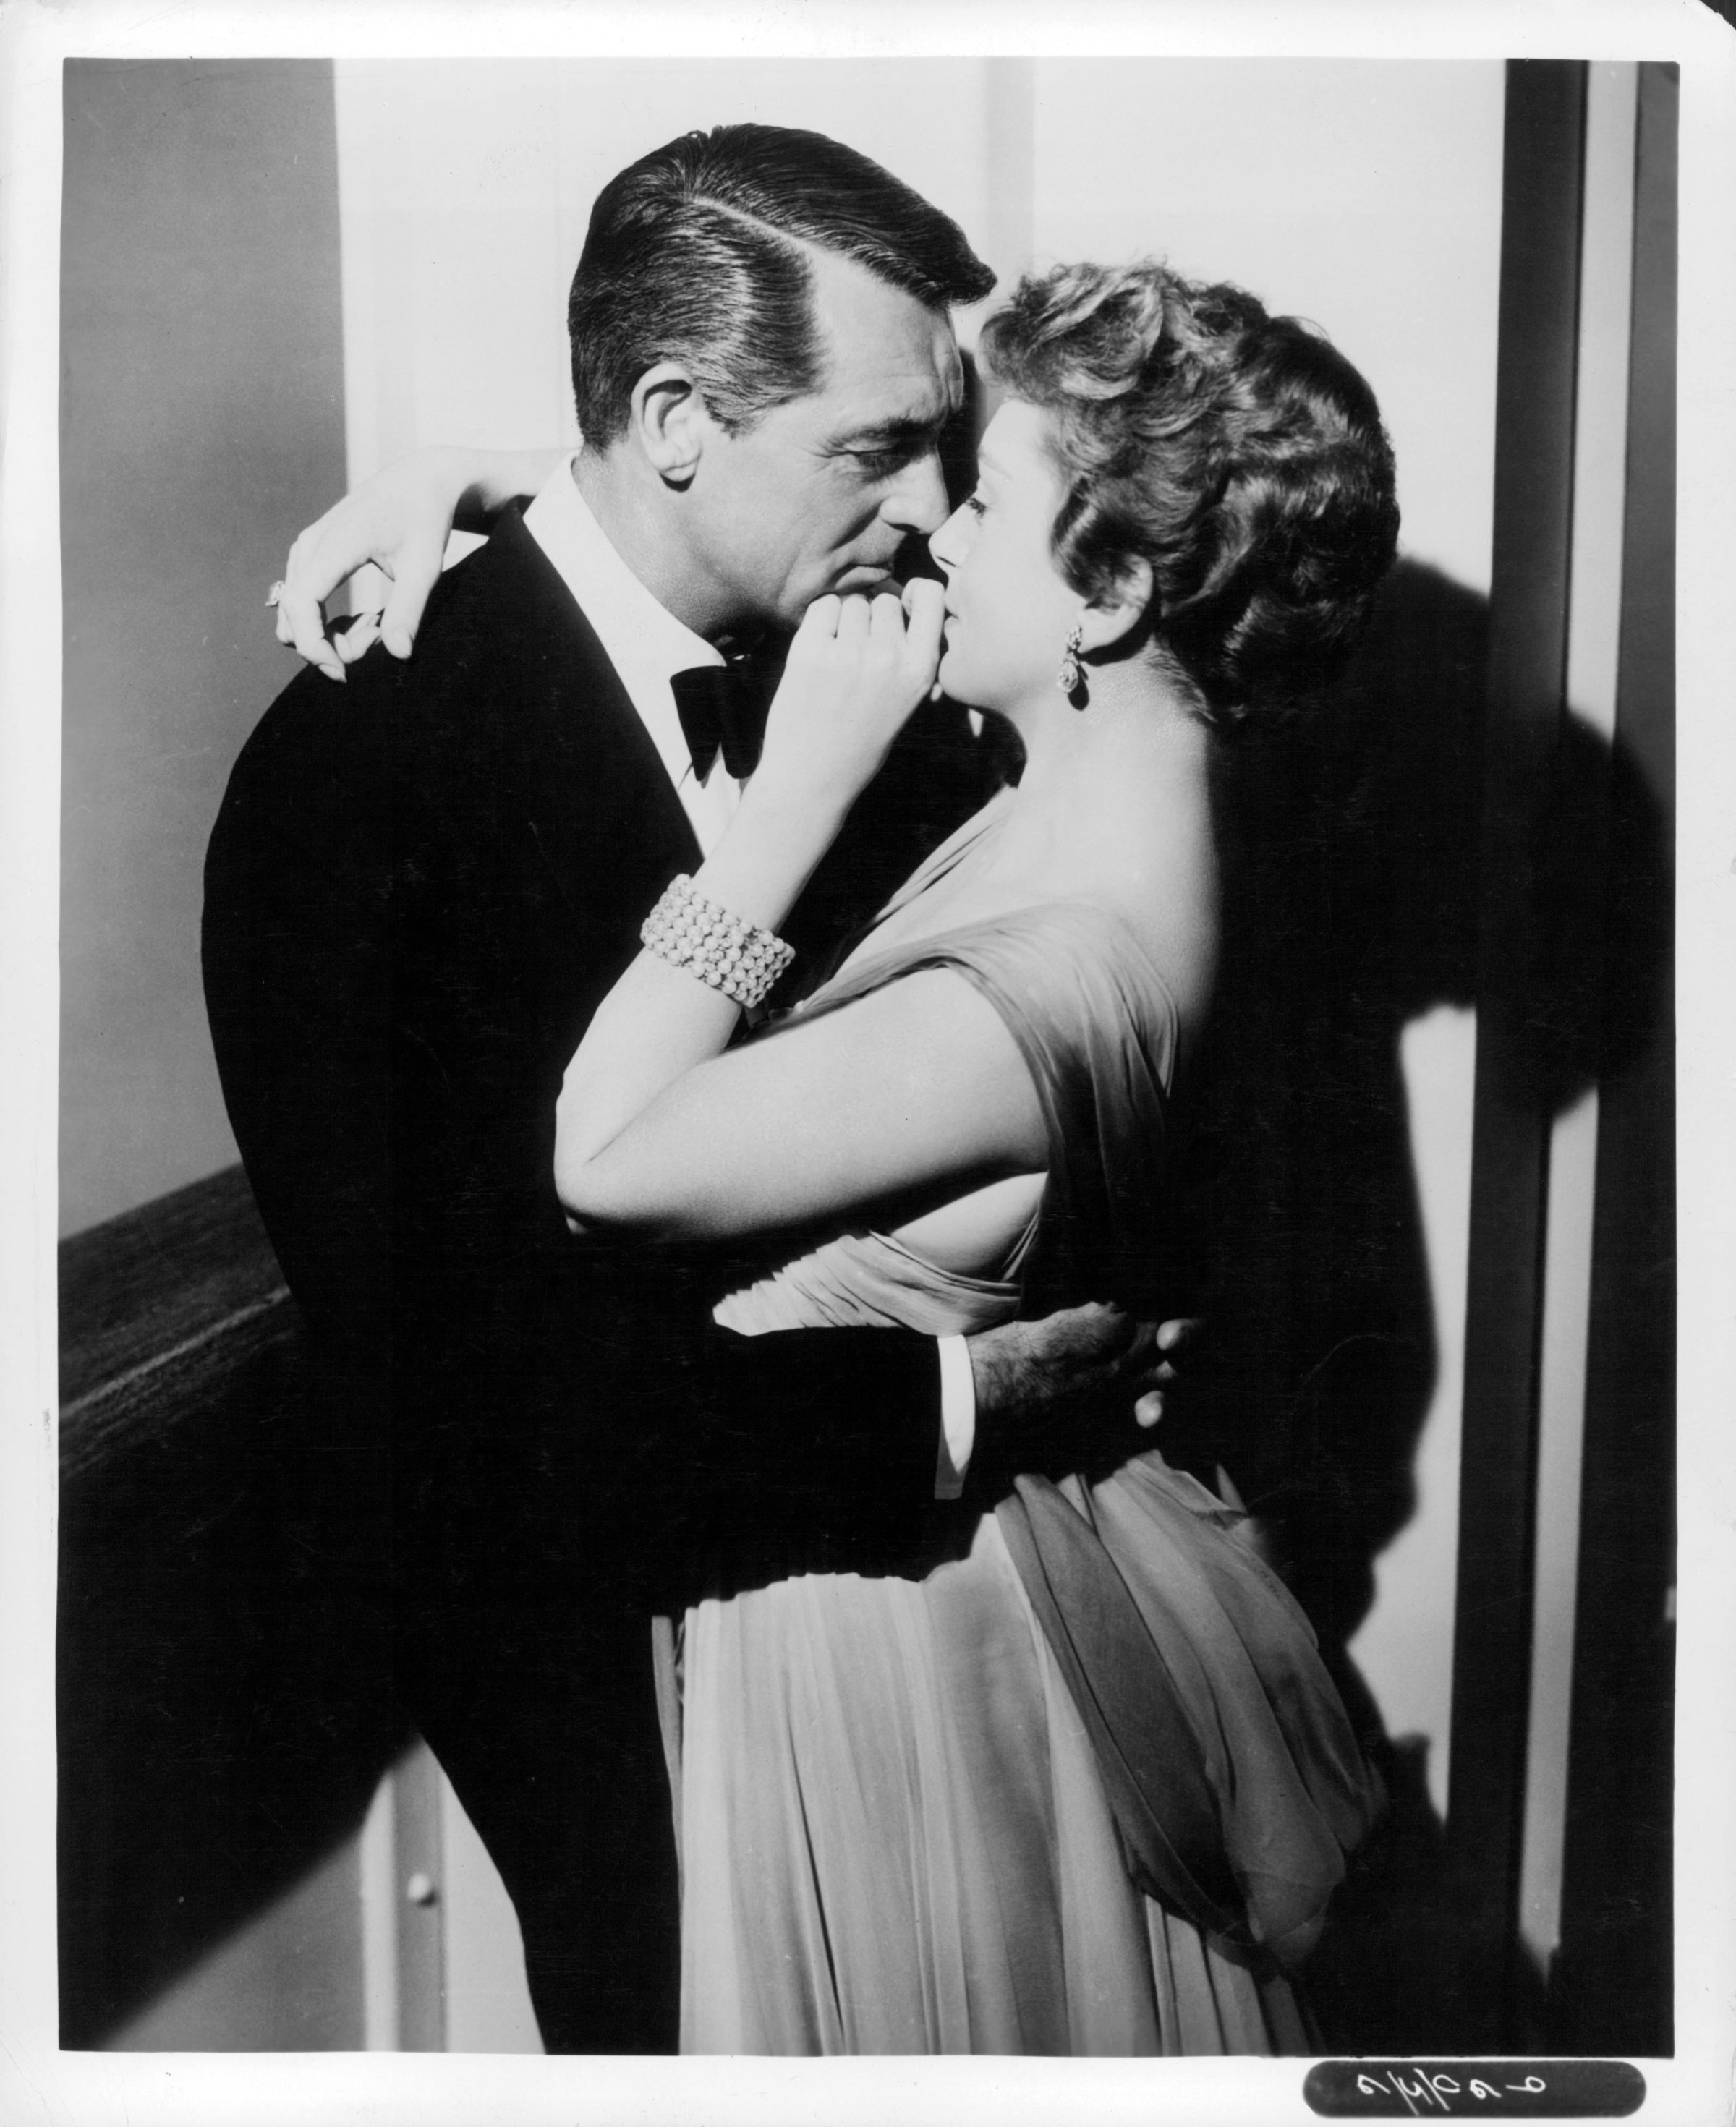 Cary Grant And Deborah Kerr In 'An Affair To Remember'